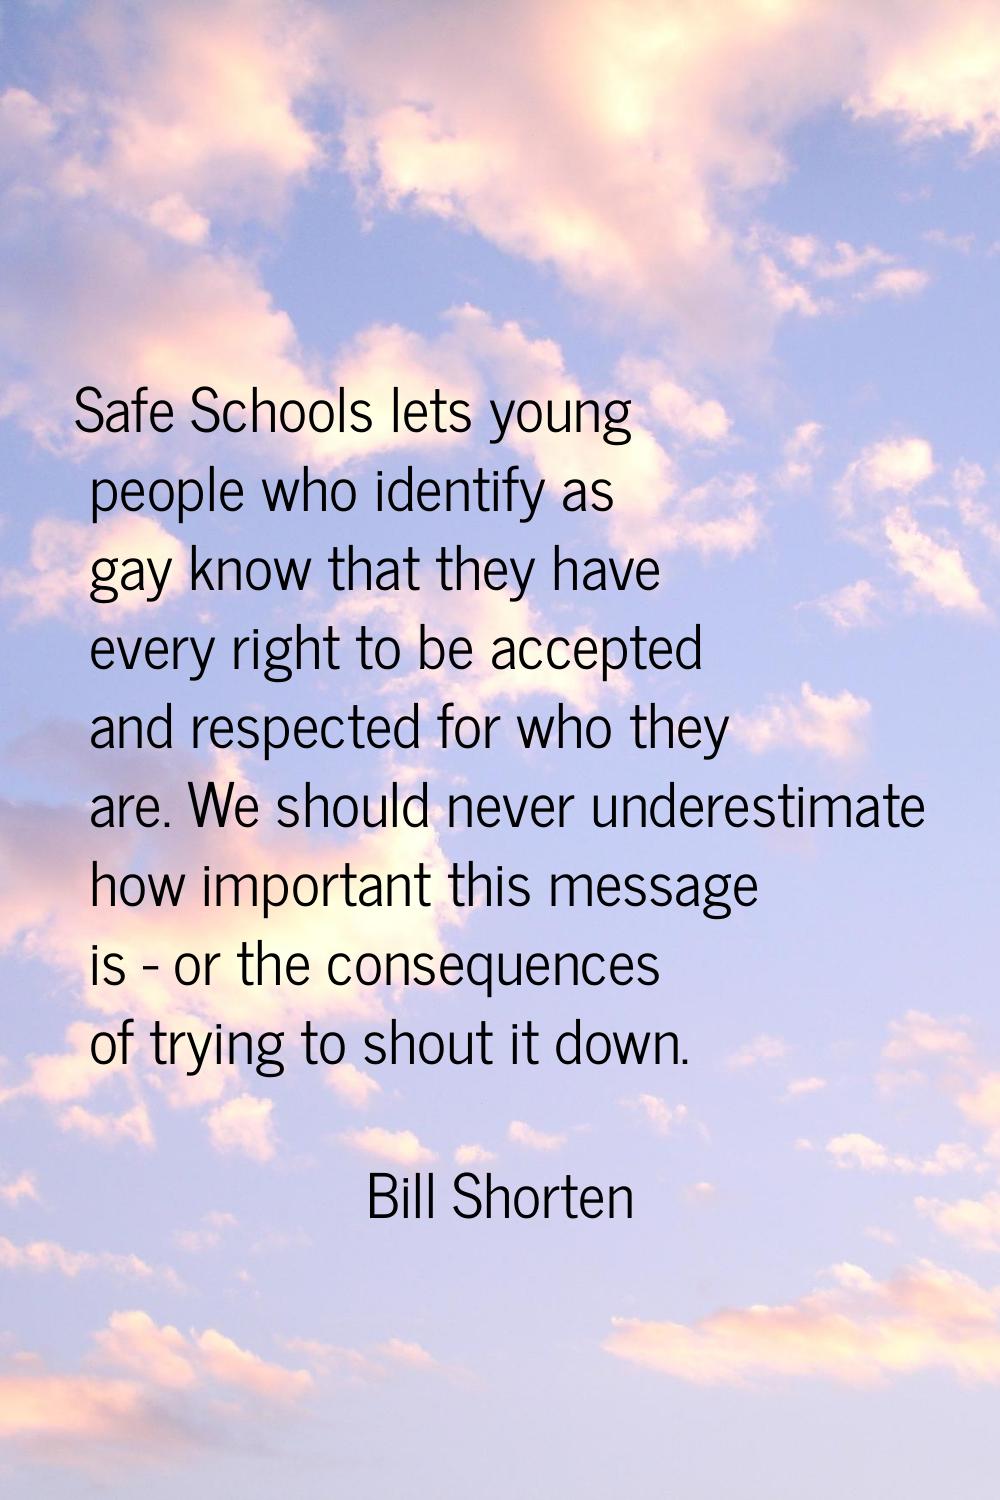 Safe Schools lets young people who identify as gay know that they have every right to be accepted a